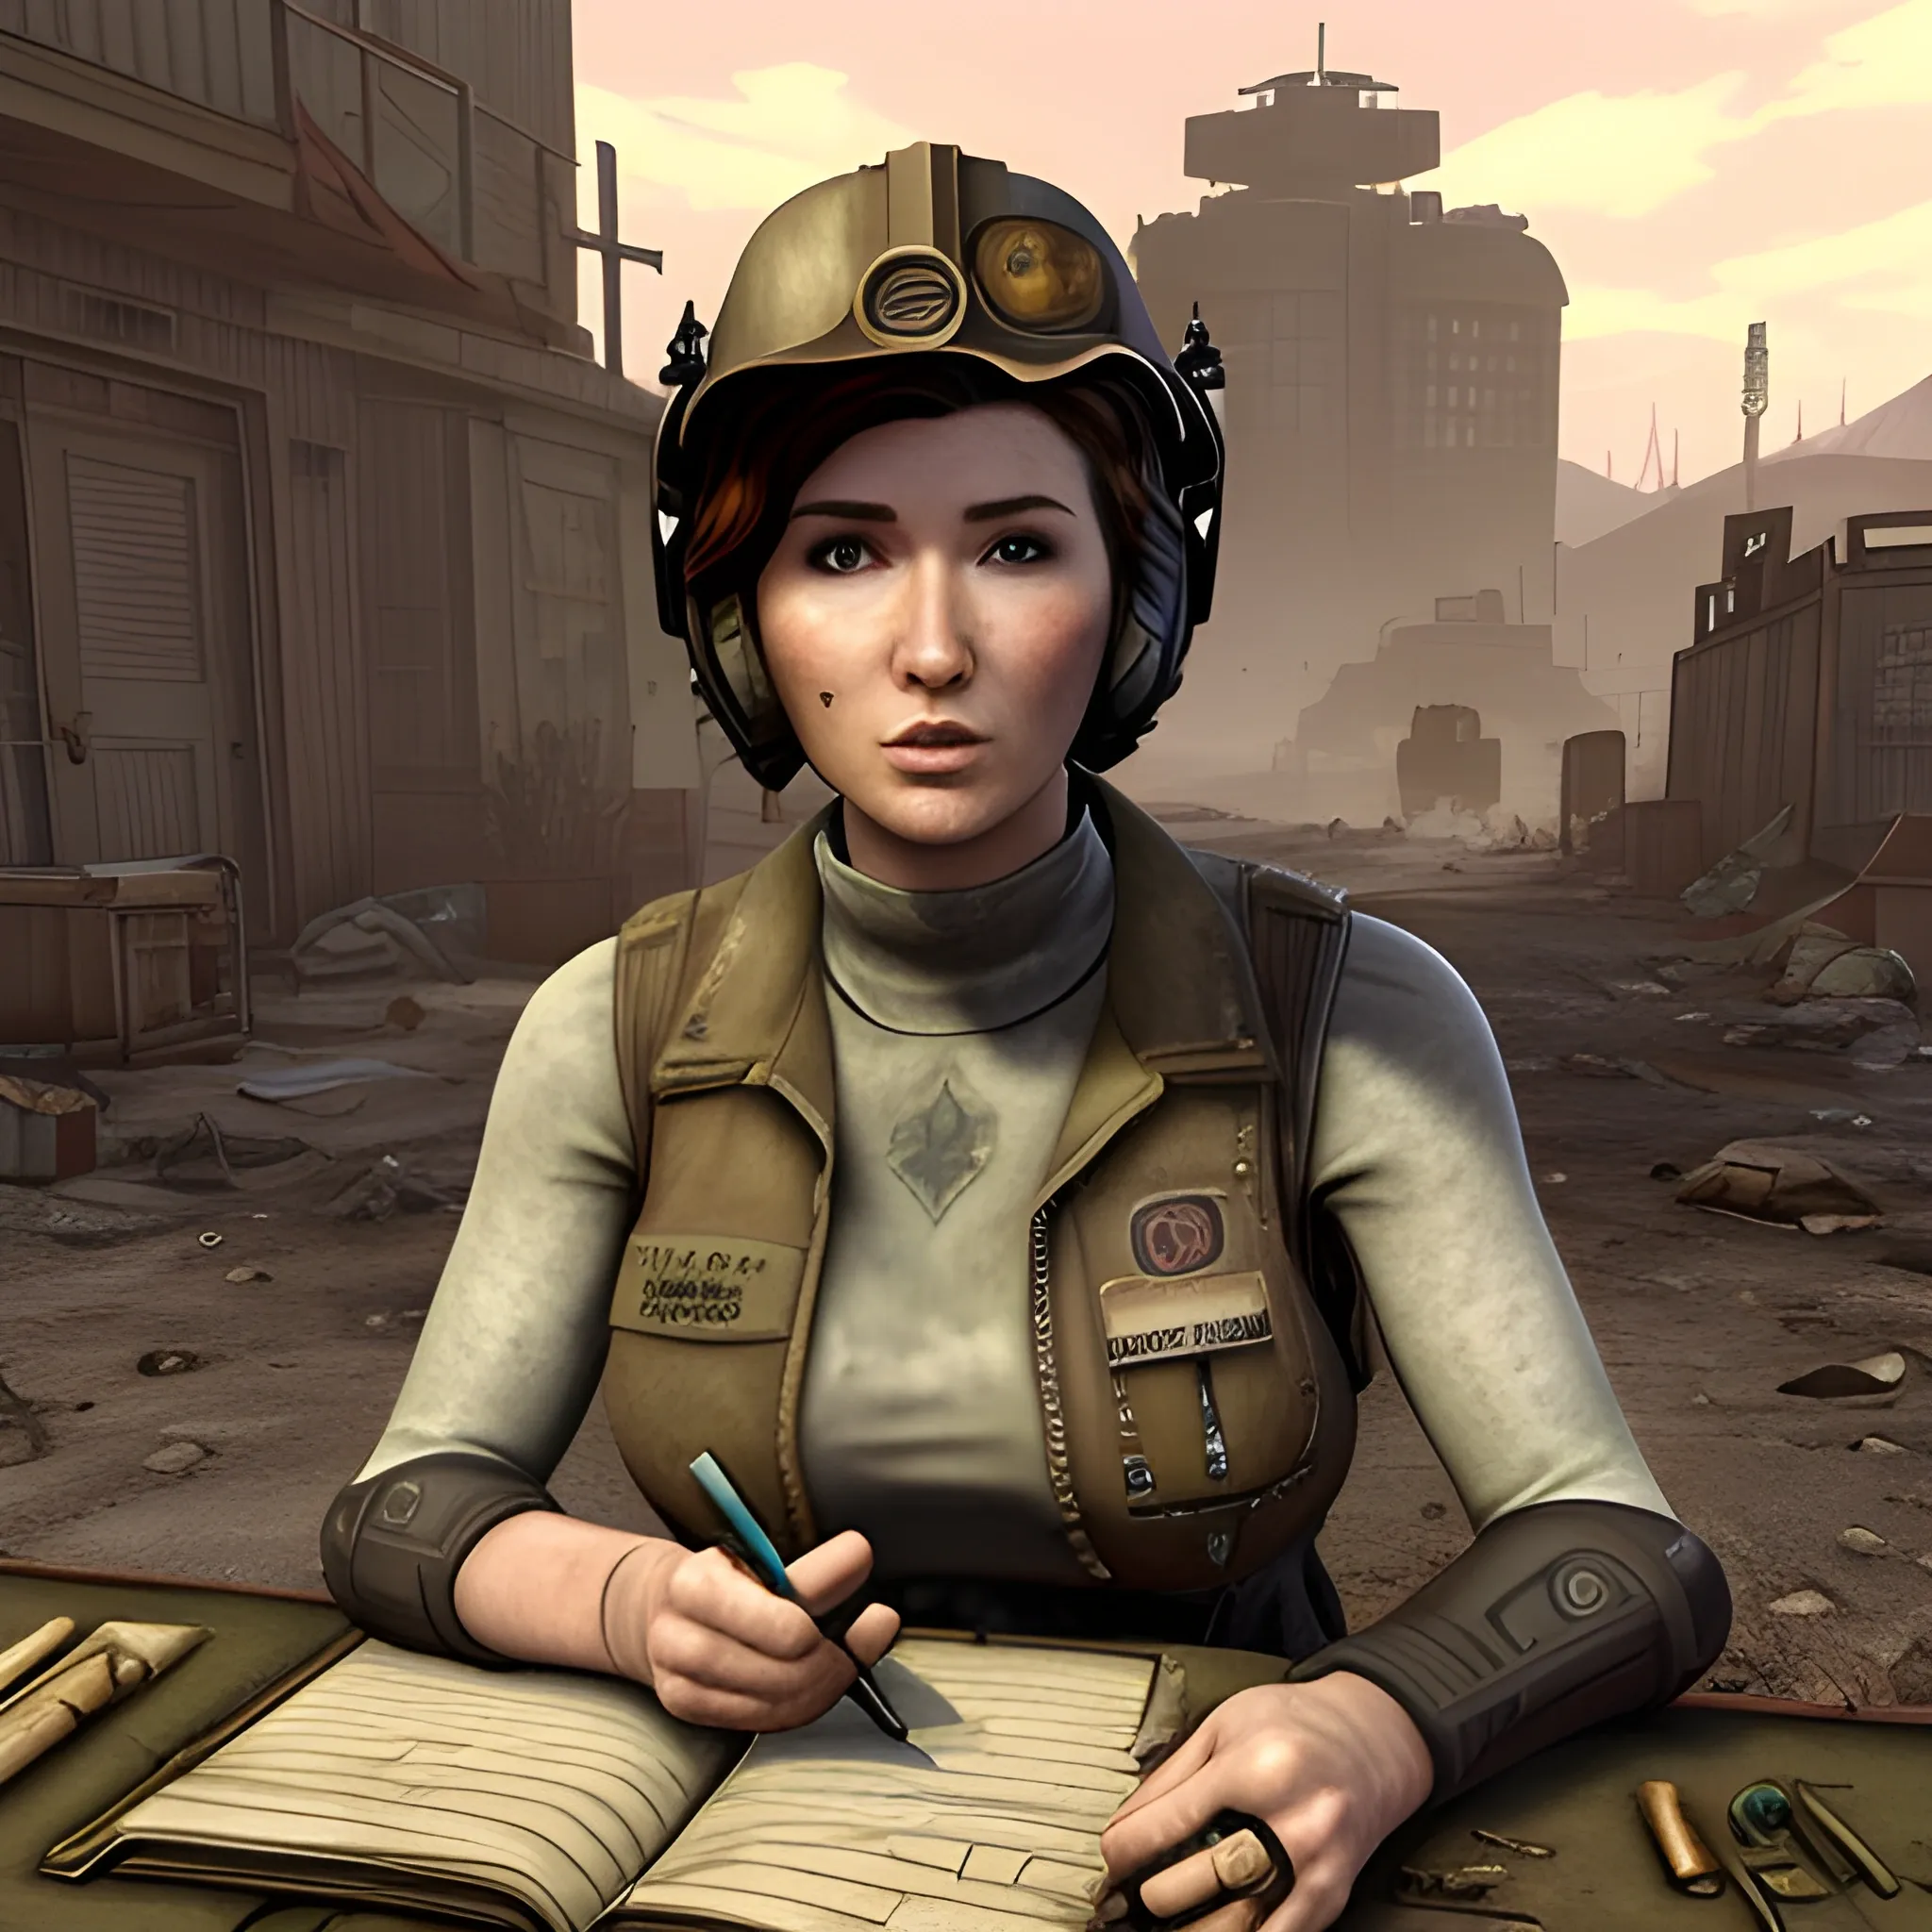 In the style of Fallout New Vegas, masterpiece, Jewel Staite as a Brotherhood of Steel Scribe with a dirty face and tilted cap, vest full of tools and notebooks